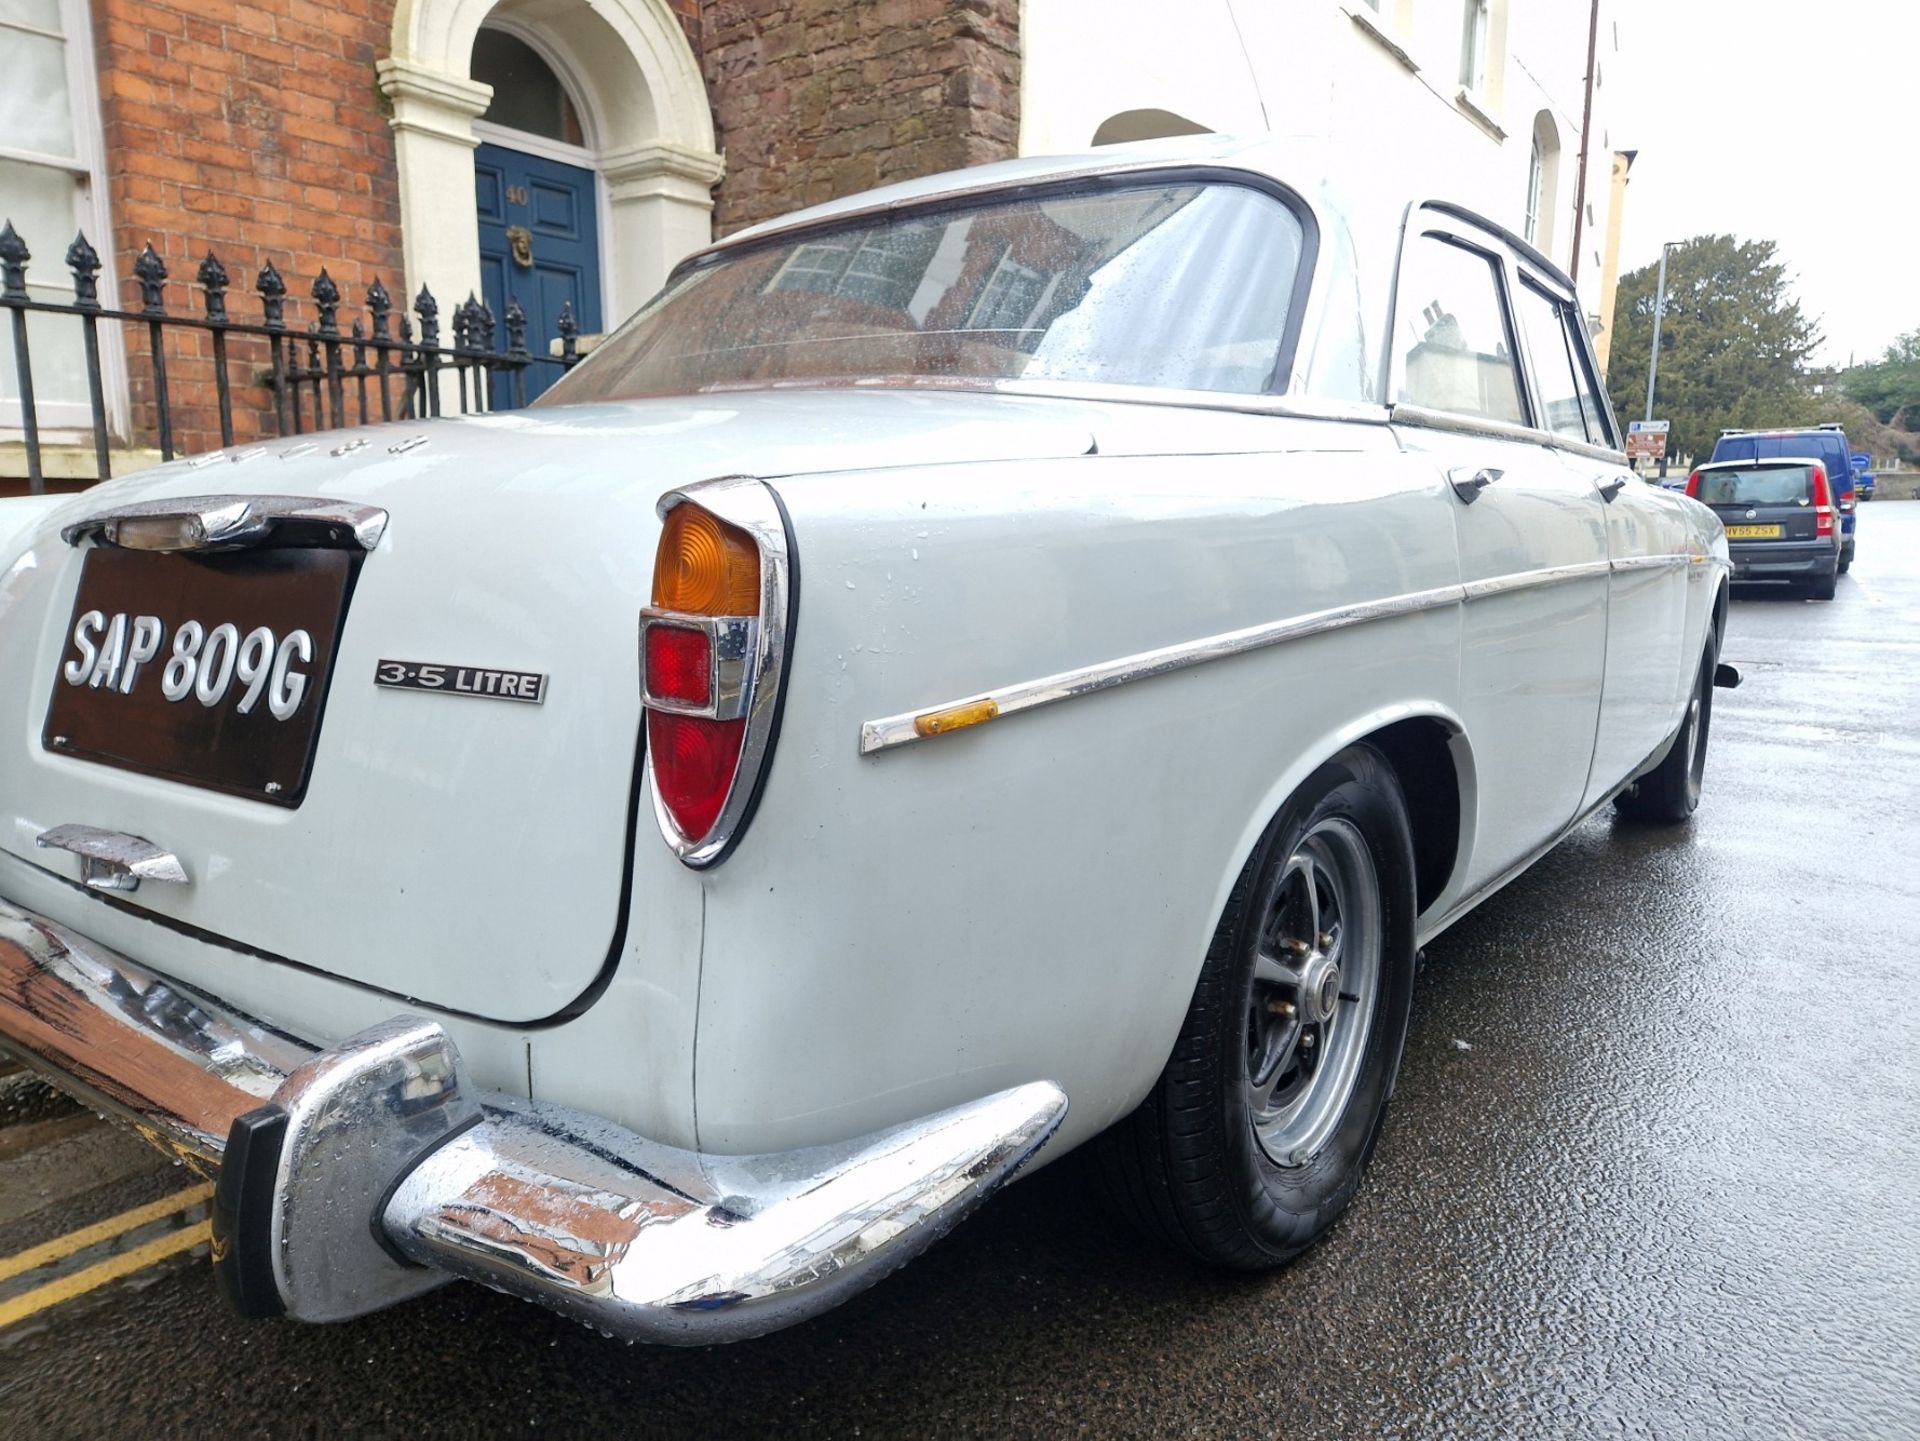 1969 Rover P5B Saloon Registration number SAP 809G Chassis number 84003266B Engine number - Image 4 of 14